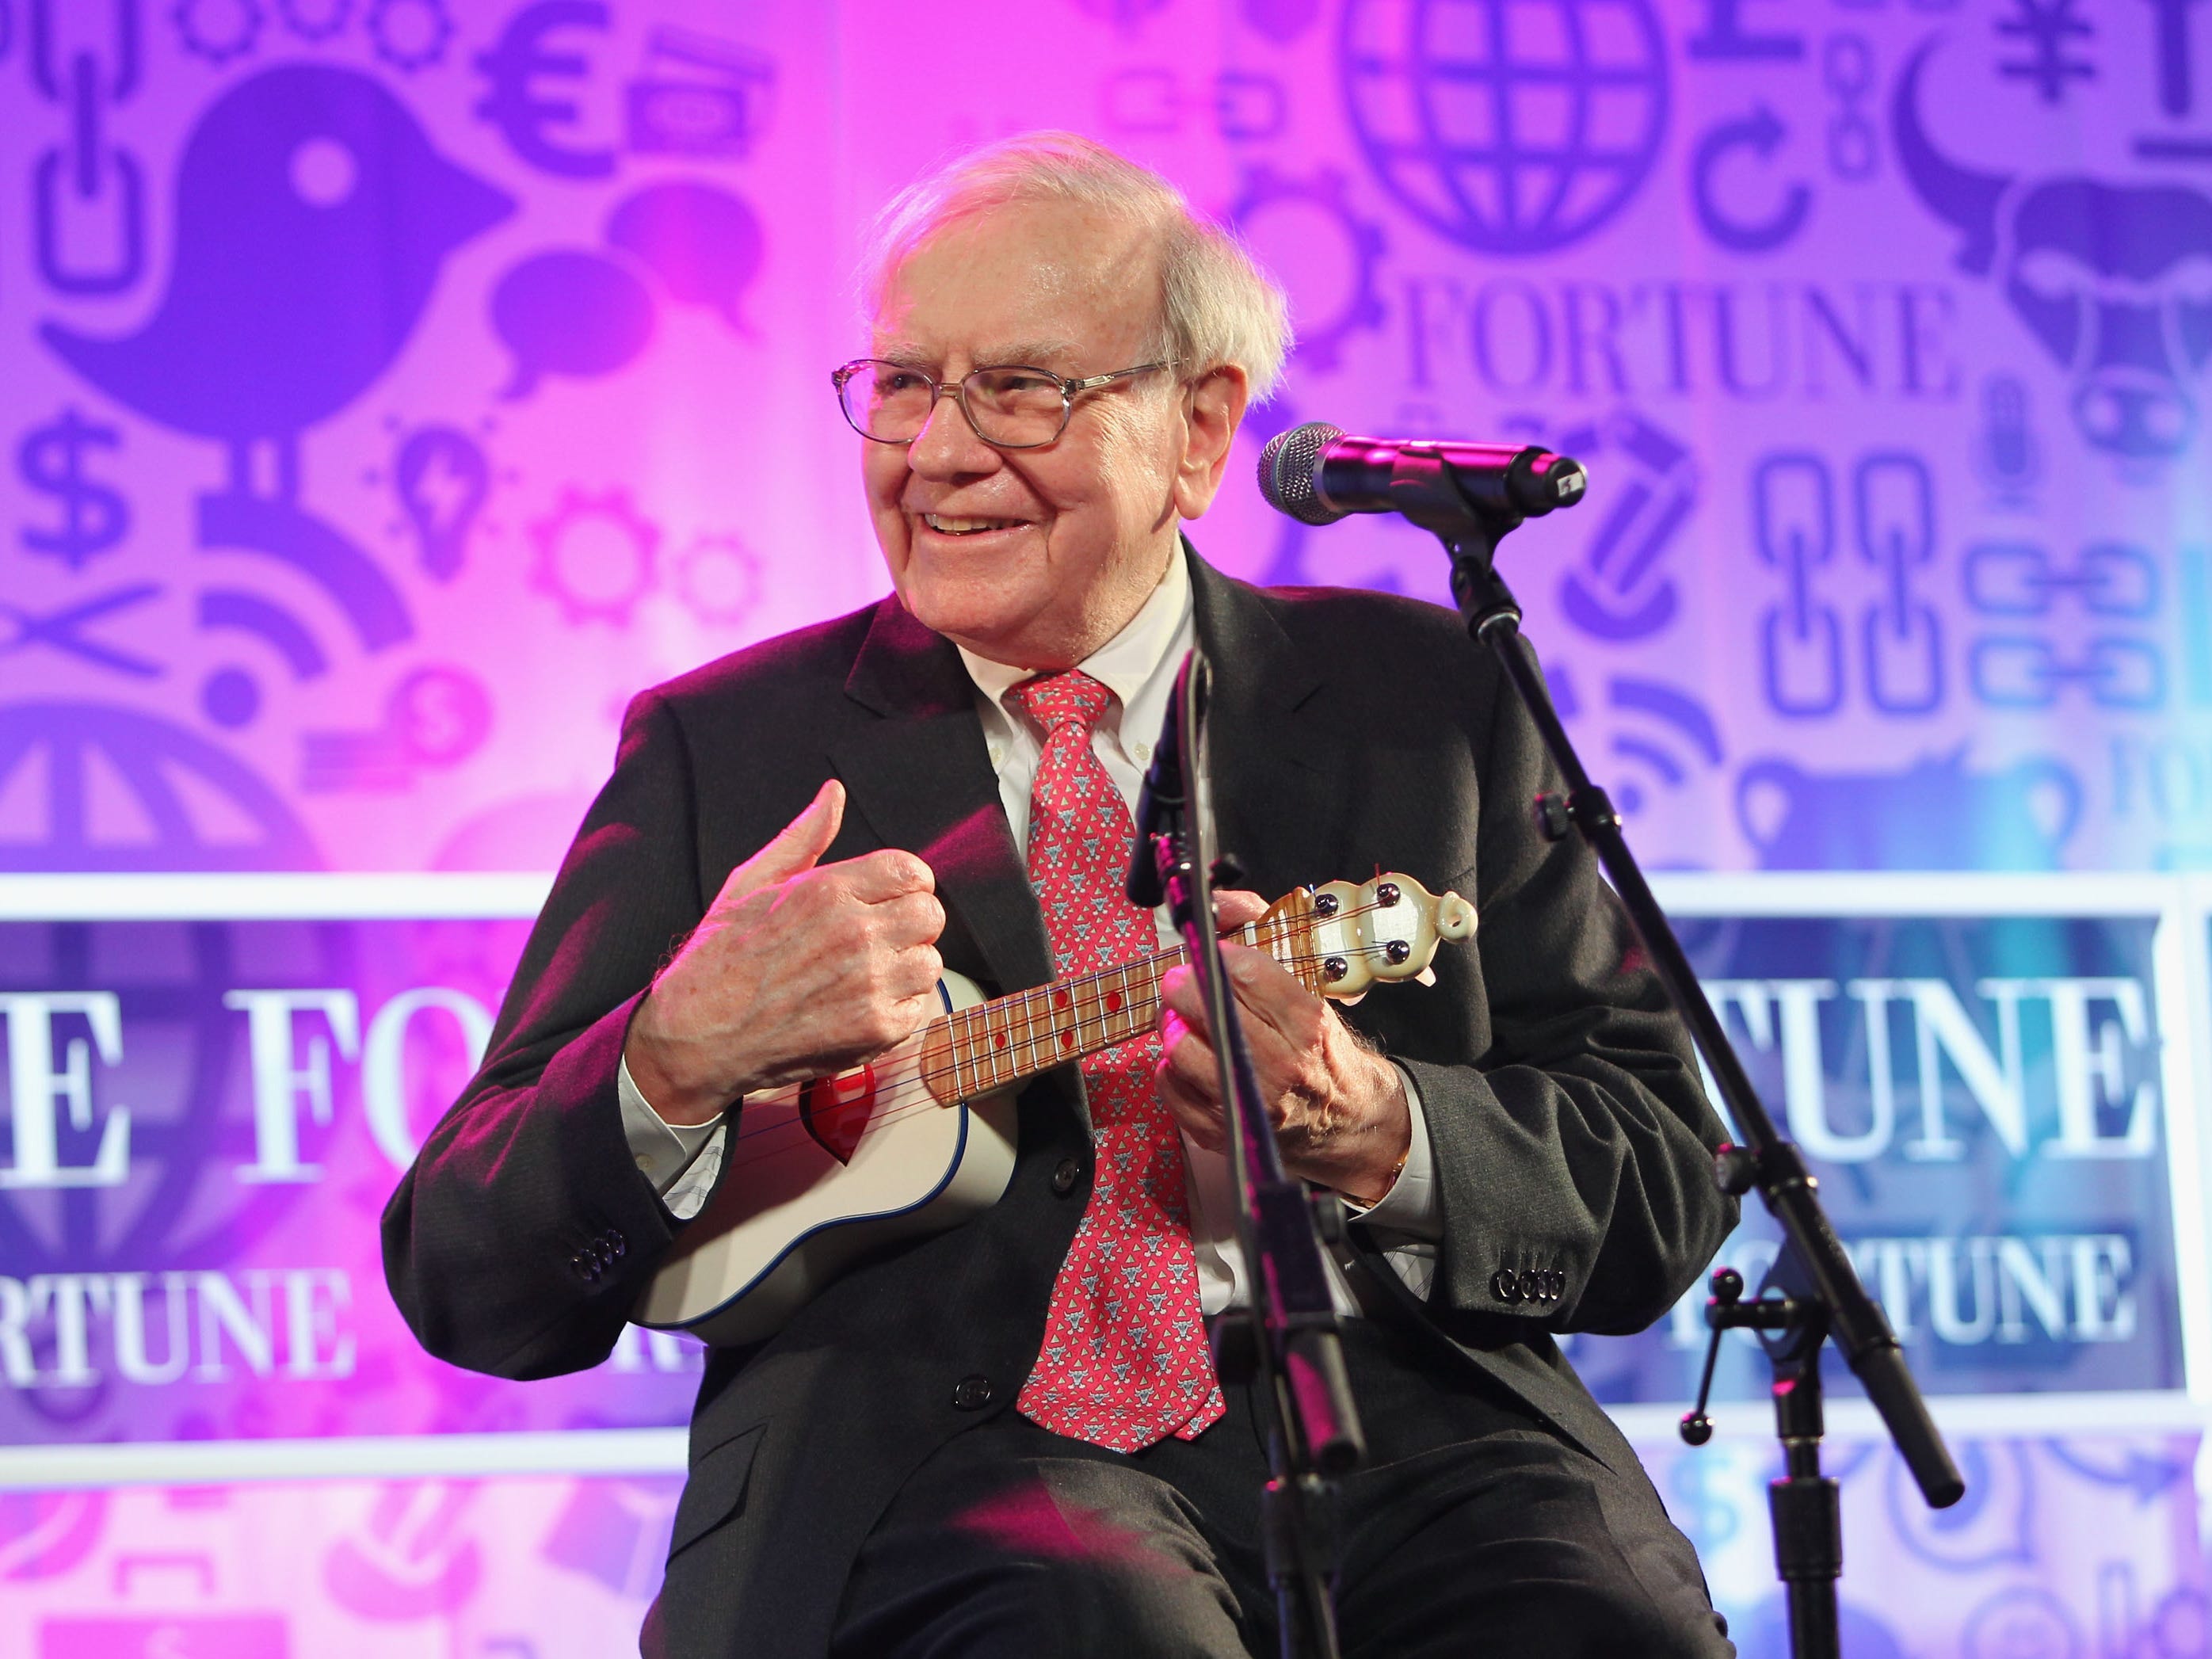 <ul class="summary-list"> <li>Berkshire Hathaway CEO and chairman Warren Buffett's net worth is now an estimated $124 billion.</li> <li>Buffett is the sixth-wealthiest person in the world, worth more than Larry Page and Mark Zuckerberg.</li> <li>The famous investor is known for living modestly and being one of the world's most generous philanthropists.</li> </ul><p>Warren Buffett's had a good year — his fortune has ballooned by more than $16 billion so far.</p><p>With an estimated net worth of $124 billion, according to the <a href="https://www.bloomberg.com/billionaires/" rel="noopener">Bloomberg Billionaires Index</a>, the 93-year-old <a href="https://markets.businessinsider.com/news/stocks/who-is-warren-buffett-berkshire-hathaway-stocks-investing-wealth-philanthropy-2023-5">Berkshire Hathaway chairman and CEO</a> is now the sixth-wealthiest person in the world. He's richer than Mark Zuckerberg, whose net worth is an estimated $111 billion, Google cofounder Sergey Brin, worth $116 billion, and former Microsoft CEO Steve Ballmer, worth $118 billion.</p><p>Looking at Buffett's frugal ways, though, you might not know it.</p><p>Still living in the house he bought in the 1950s and driving an equally modest car, the Oracle of Omaha prefers to keep and grow his money rather than take it out of the bank. He eats McDonald's for breakfast in the mornings and borrowed furniture when his children were born.</p><p>See how Buffett spends — or doesn't spend — his billions.</p><div class="read-original">Read the original article on <a href="https://www.businessinsider.com/how-warren-buffett-spends-money-net-worth">Business Insider</a></div>